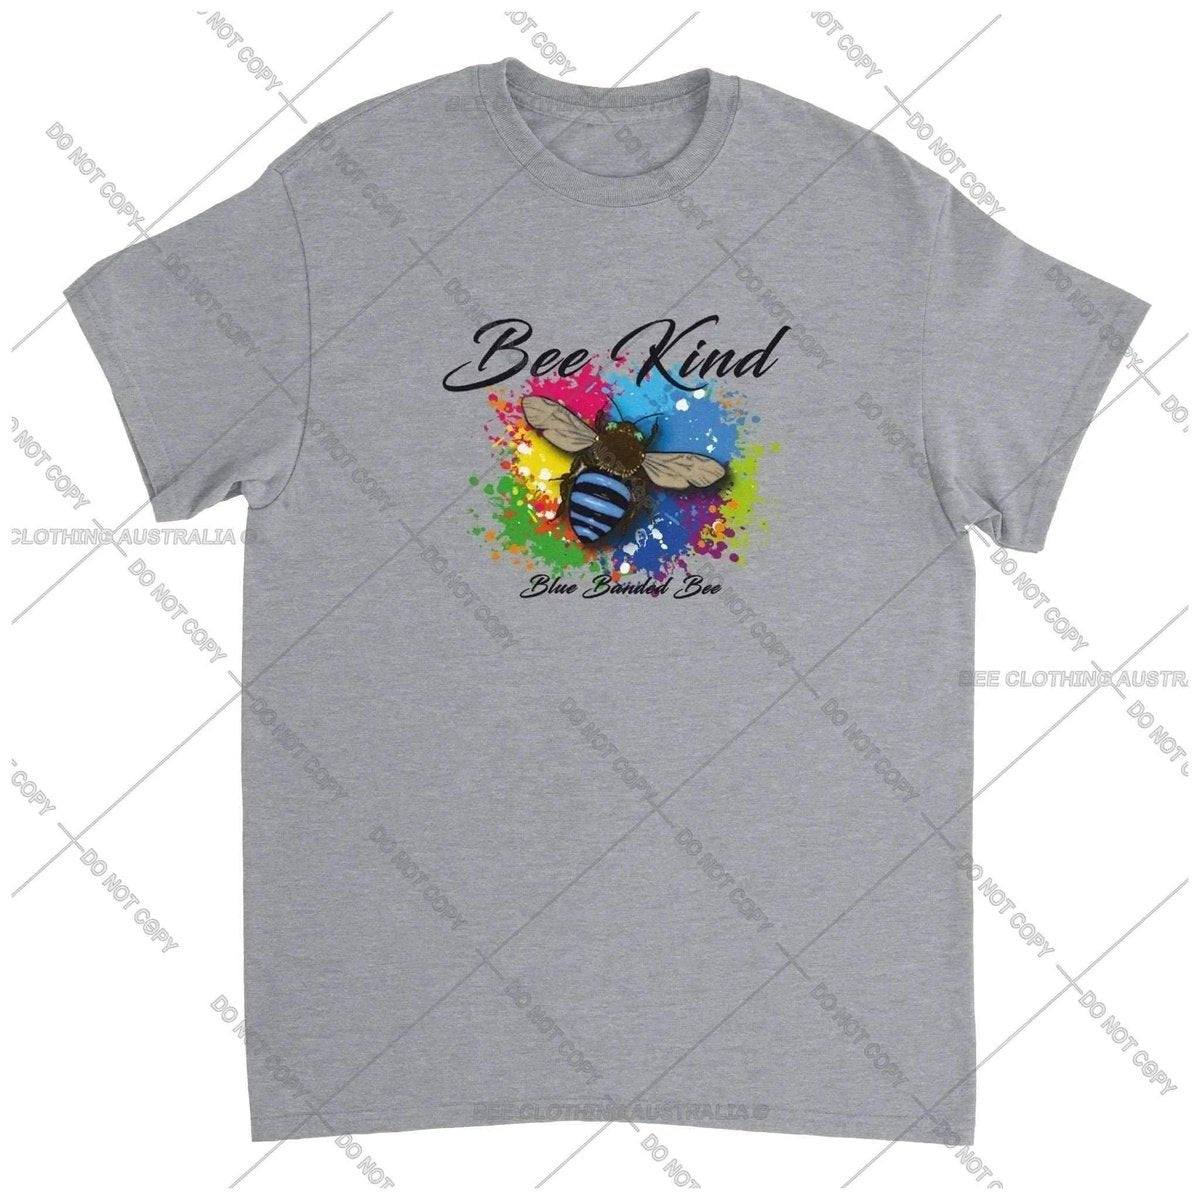 Bee Kind - Blue Banded Bee - Native Bee T-Shirt Unisex - Classic Unisex Crewneck T-shirt Australia Online Color Sports Grey / S